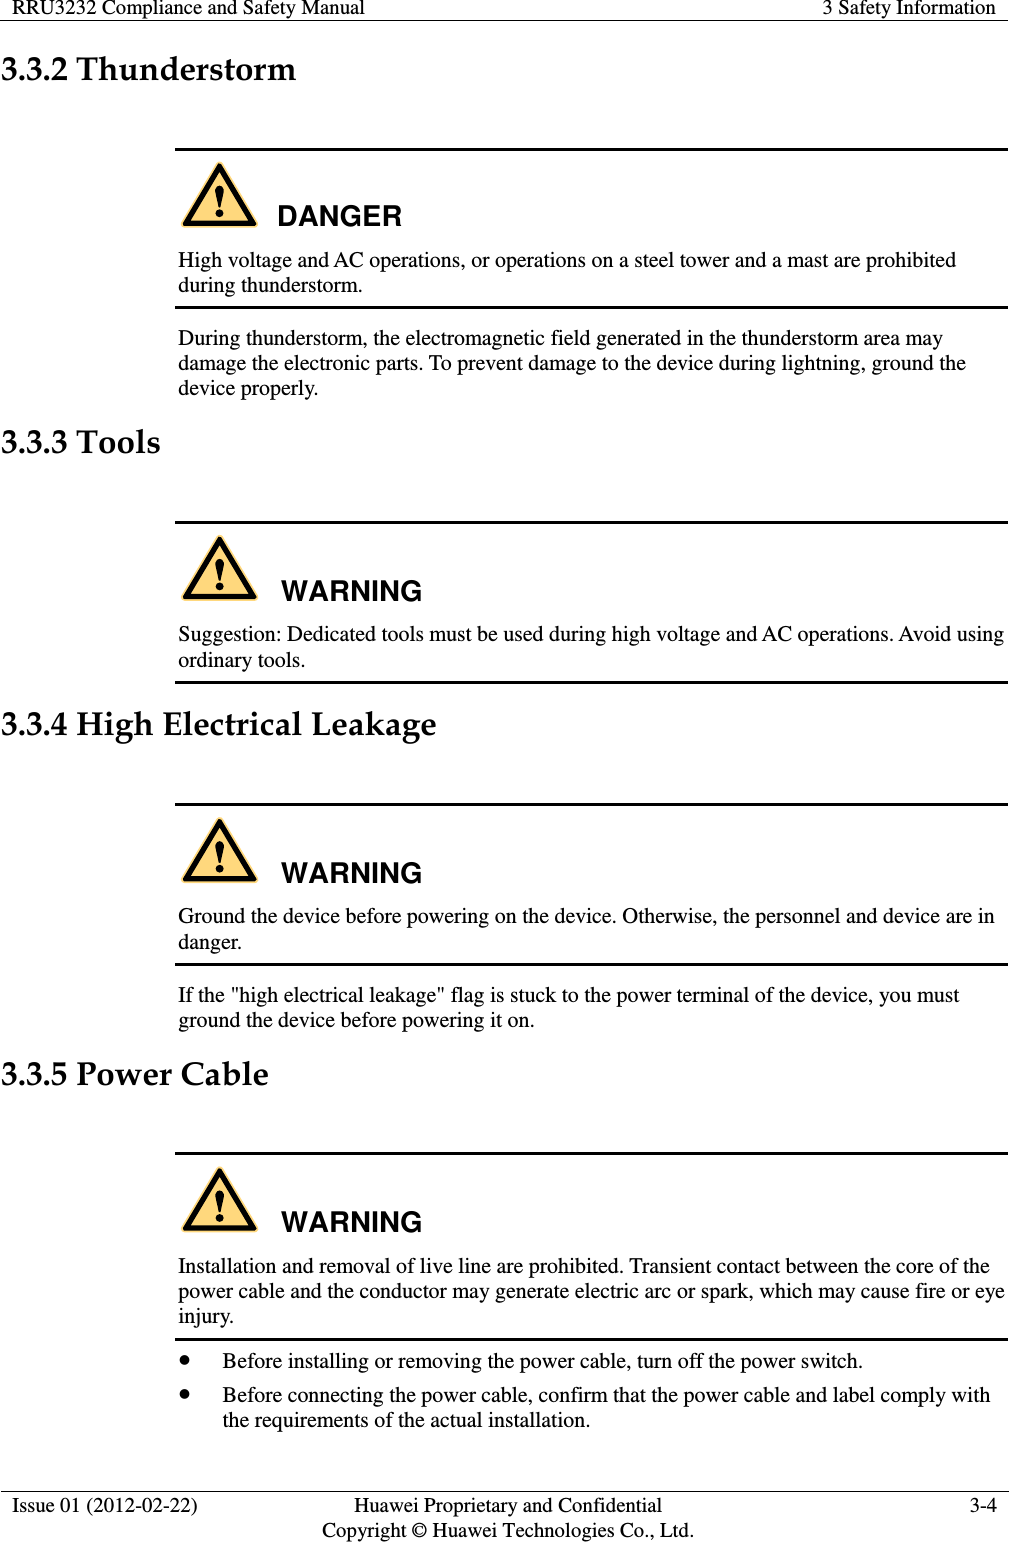 RRU3232 Compliance and Safety Manual 3 Safety Information  Issue 01 (2012-02-22) Huawei Proprietary and Confidential         Copyright © Huawei Technologies Co., Ltd. 3-4  3.3.2 Thunderstorm  DANGER High voltage and AC operations, or operations on a steel tower and a mast are prohibited during thunderstorm. During thunderstorm, the electromagnetic field generated in the thunderstorm area may damage the electronic parts. To prevent damage to the device during lightning, ground the device properly. 3.3.3 Tools  WARNING Suggestion: Dedicated tools must be used during high voltage and AC operations. Avoid using ordinary tools. 3.3.4 High Electrical Leakage  WARNING Ground the device before powering on the device. Otherwise, the personnel and device are in danger. If the &quot;high electrical leakage&quot; flag is stuck to the power terminal of the device, you must ground the device before powering it on. 3.3.5 Power Cable  WARNING Installation and removal of live line are prohibited. Transient contact between the core of the power cable and the conductor may generate electric arc or spark, which may cause fire or eye injury.  Before installing or removing the power cable, turn off the power switch.  Before connecting the power cable, confirm that the power cable and label comply with the requirements of the actual installation. 